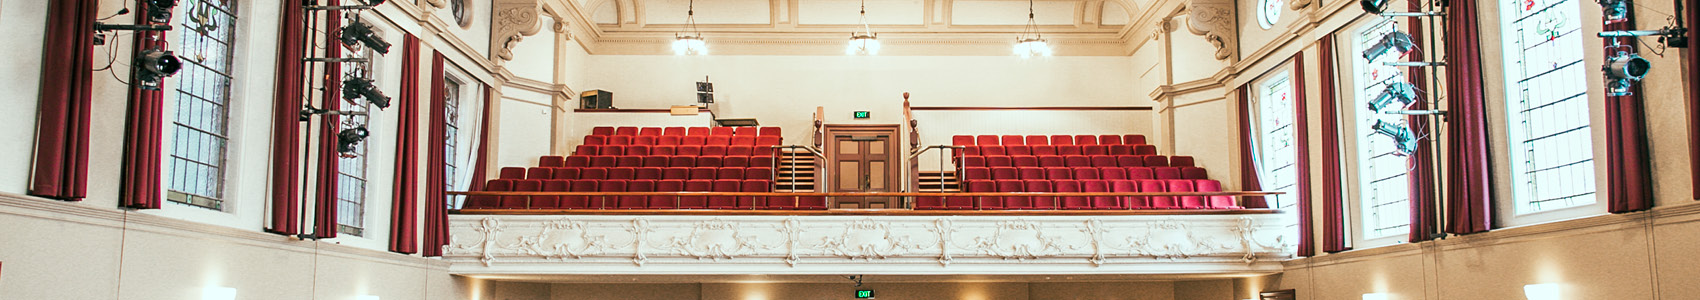 Concert Chamber, Auckland Town Hall